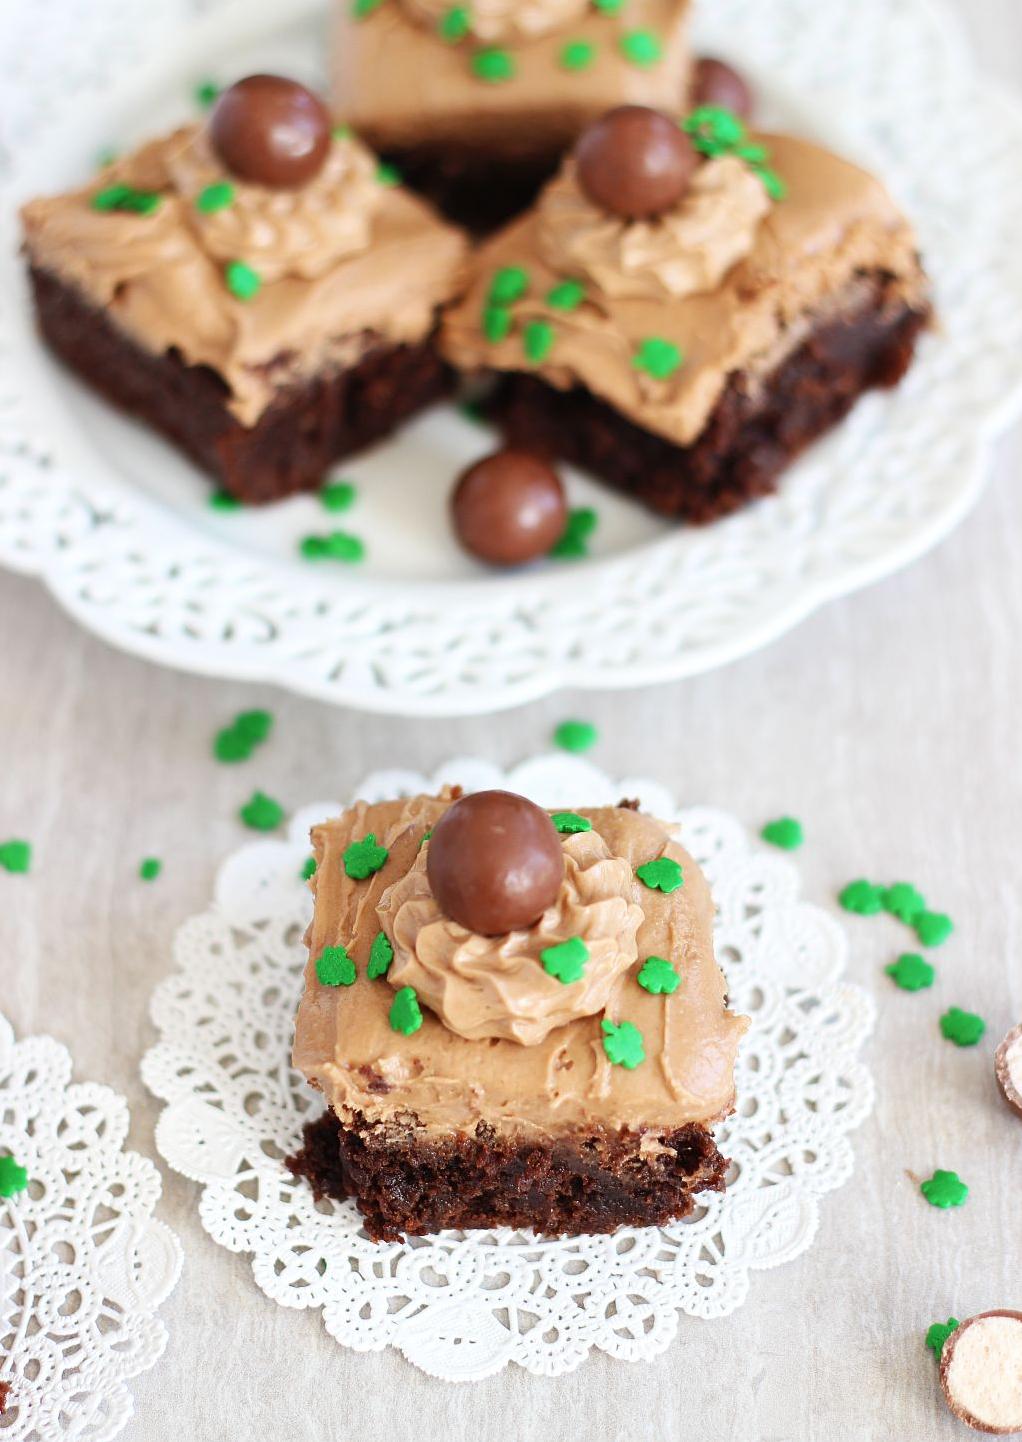  Simple to make with stunning results: Baileys Irish Cream Brownie Buttons.